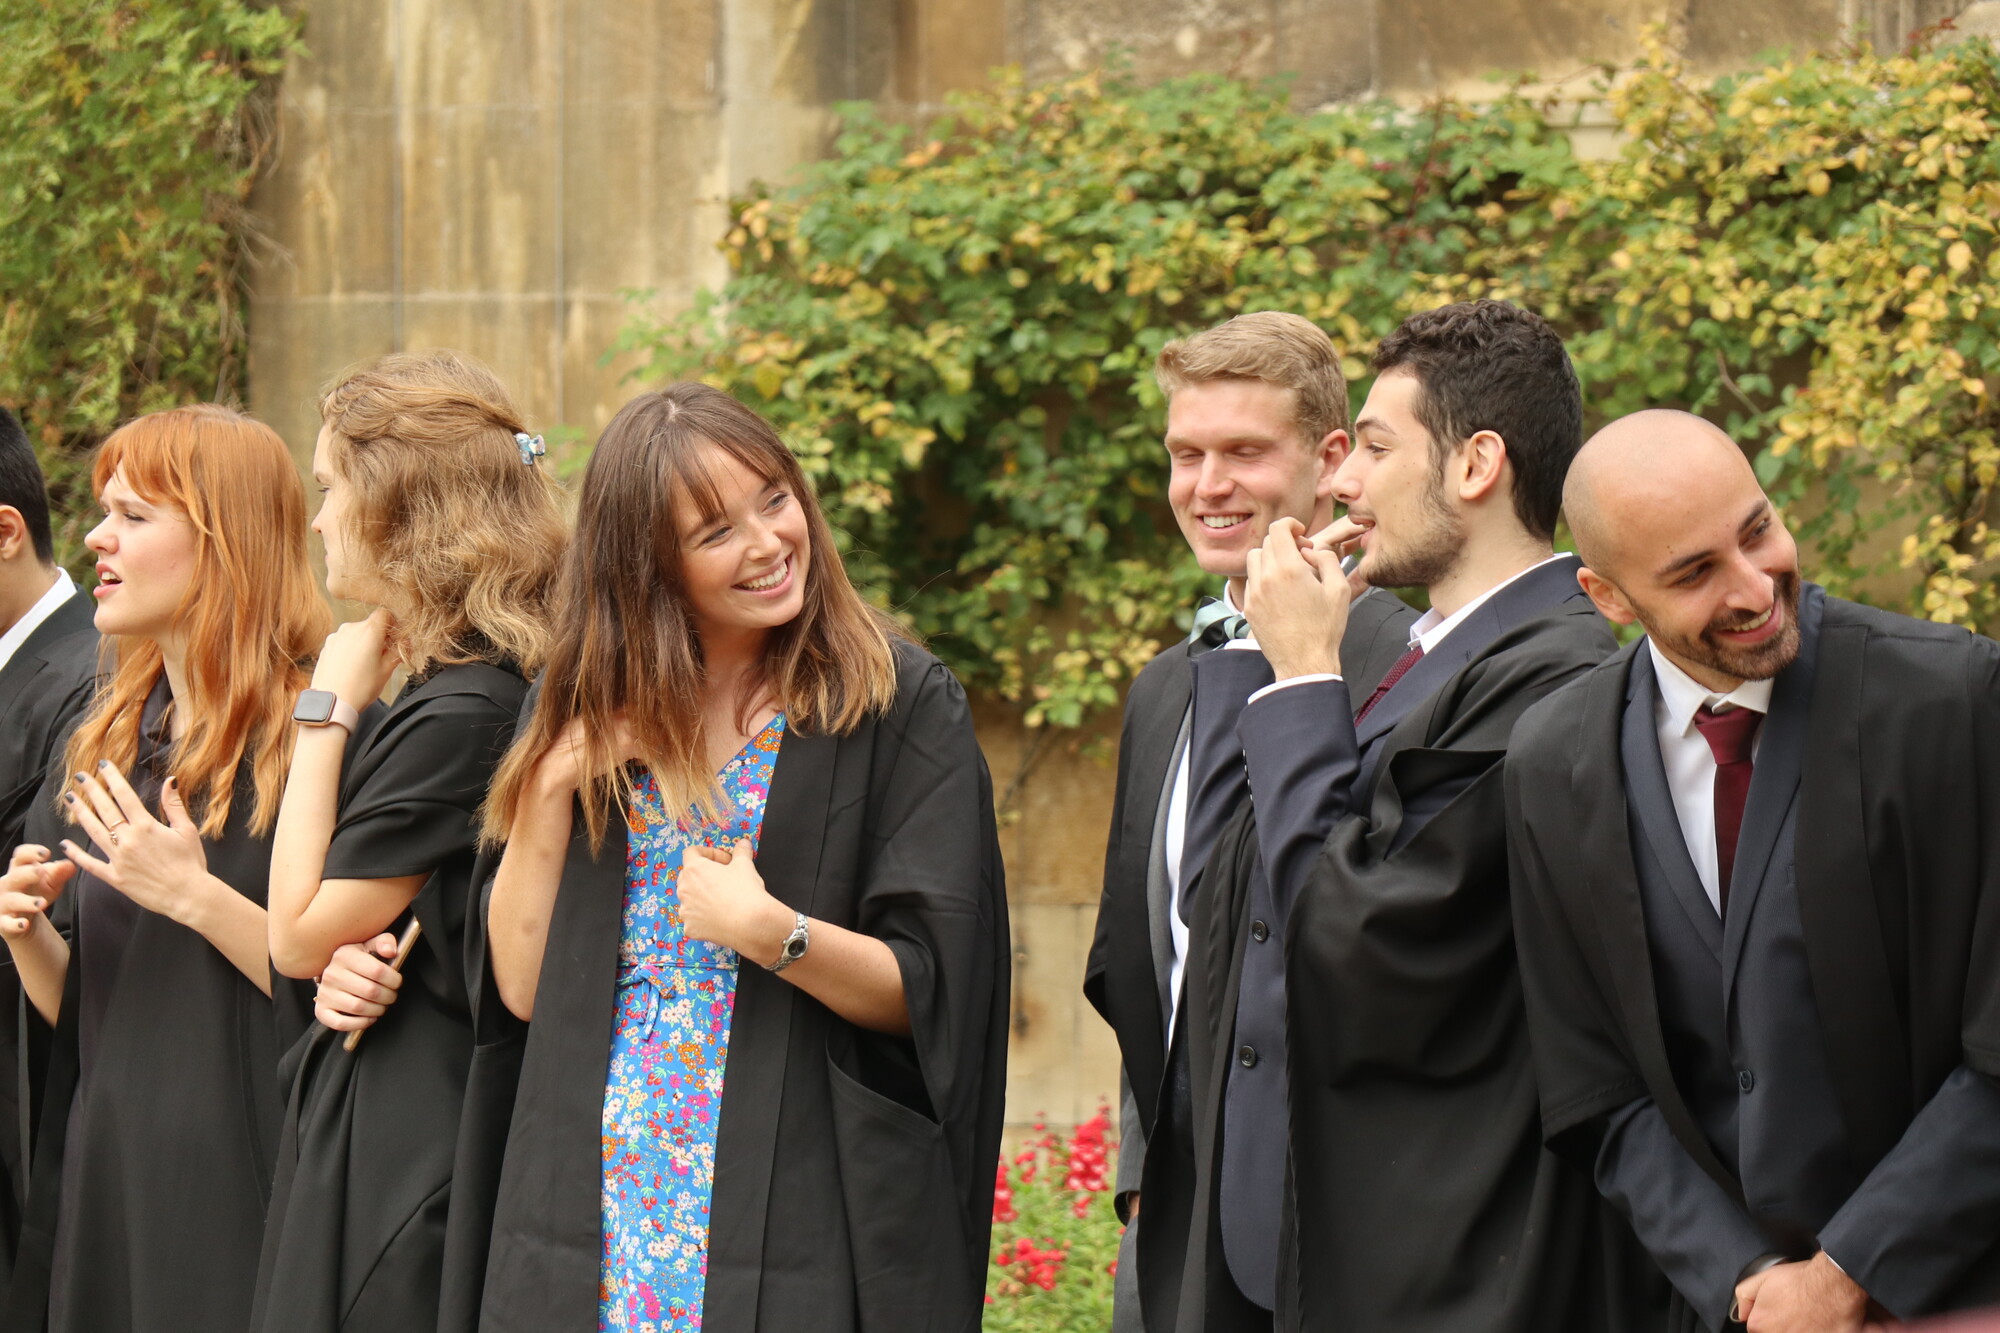 Postgraduate students in academic gowns